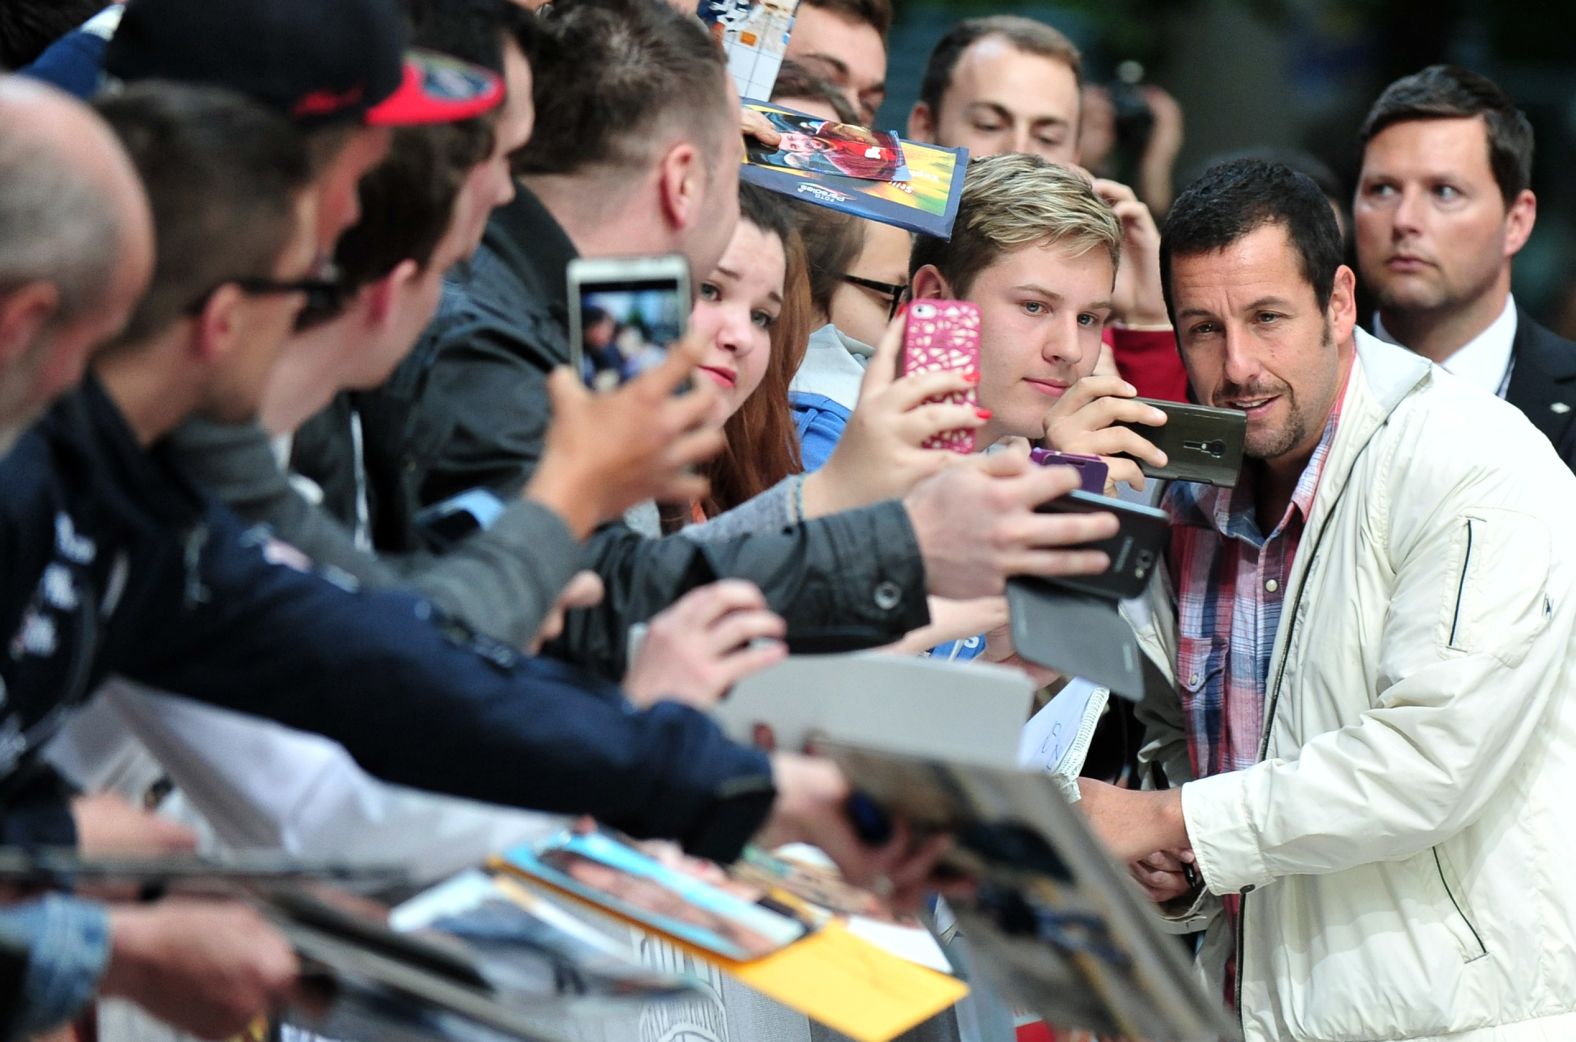 Sandler greets fans in Berlin at the premiere of the film "Blended" in 2014.